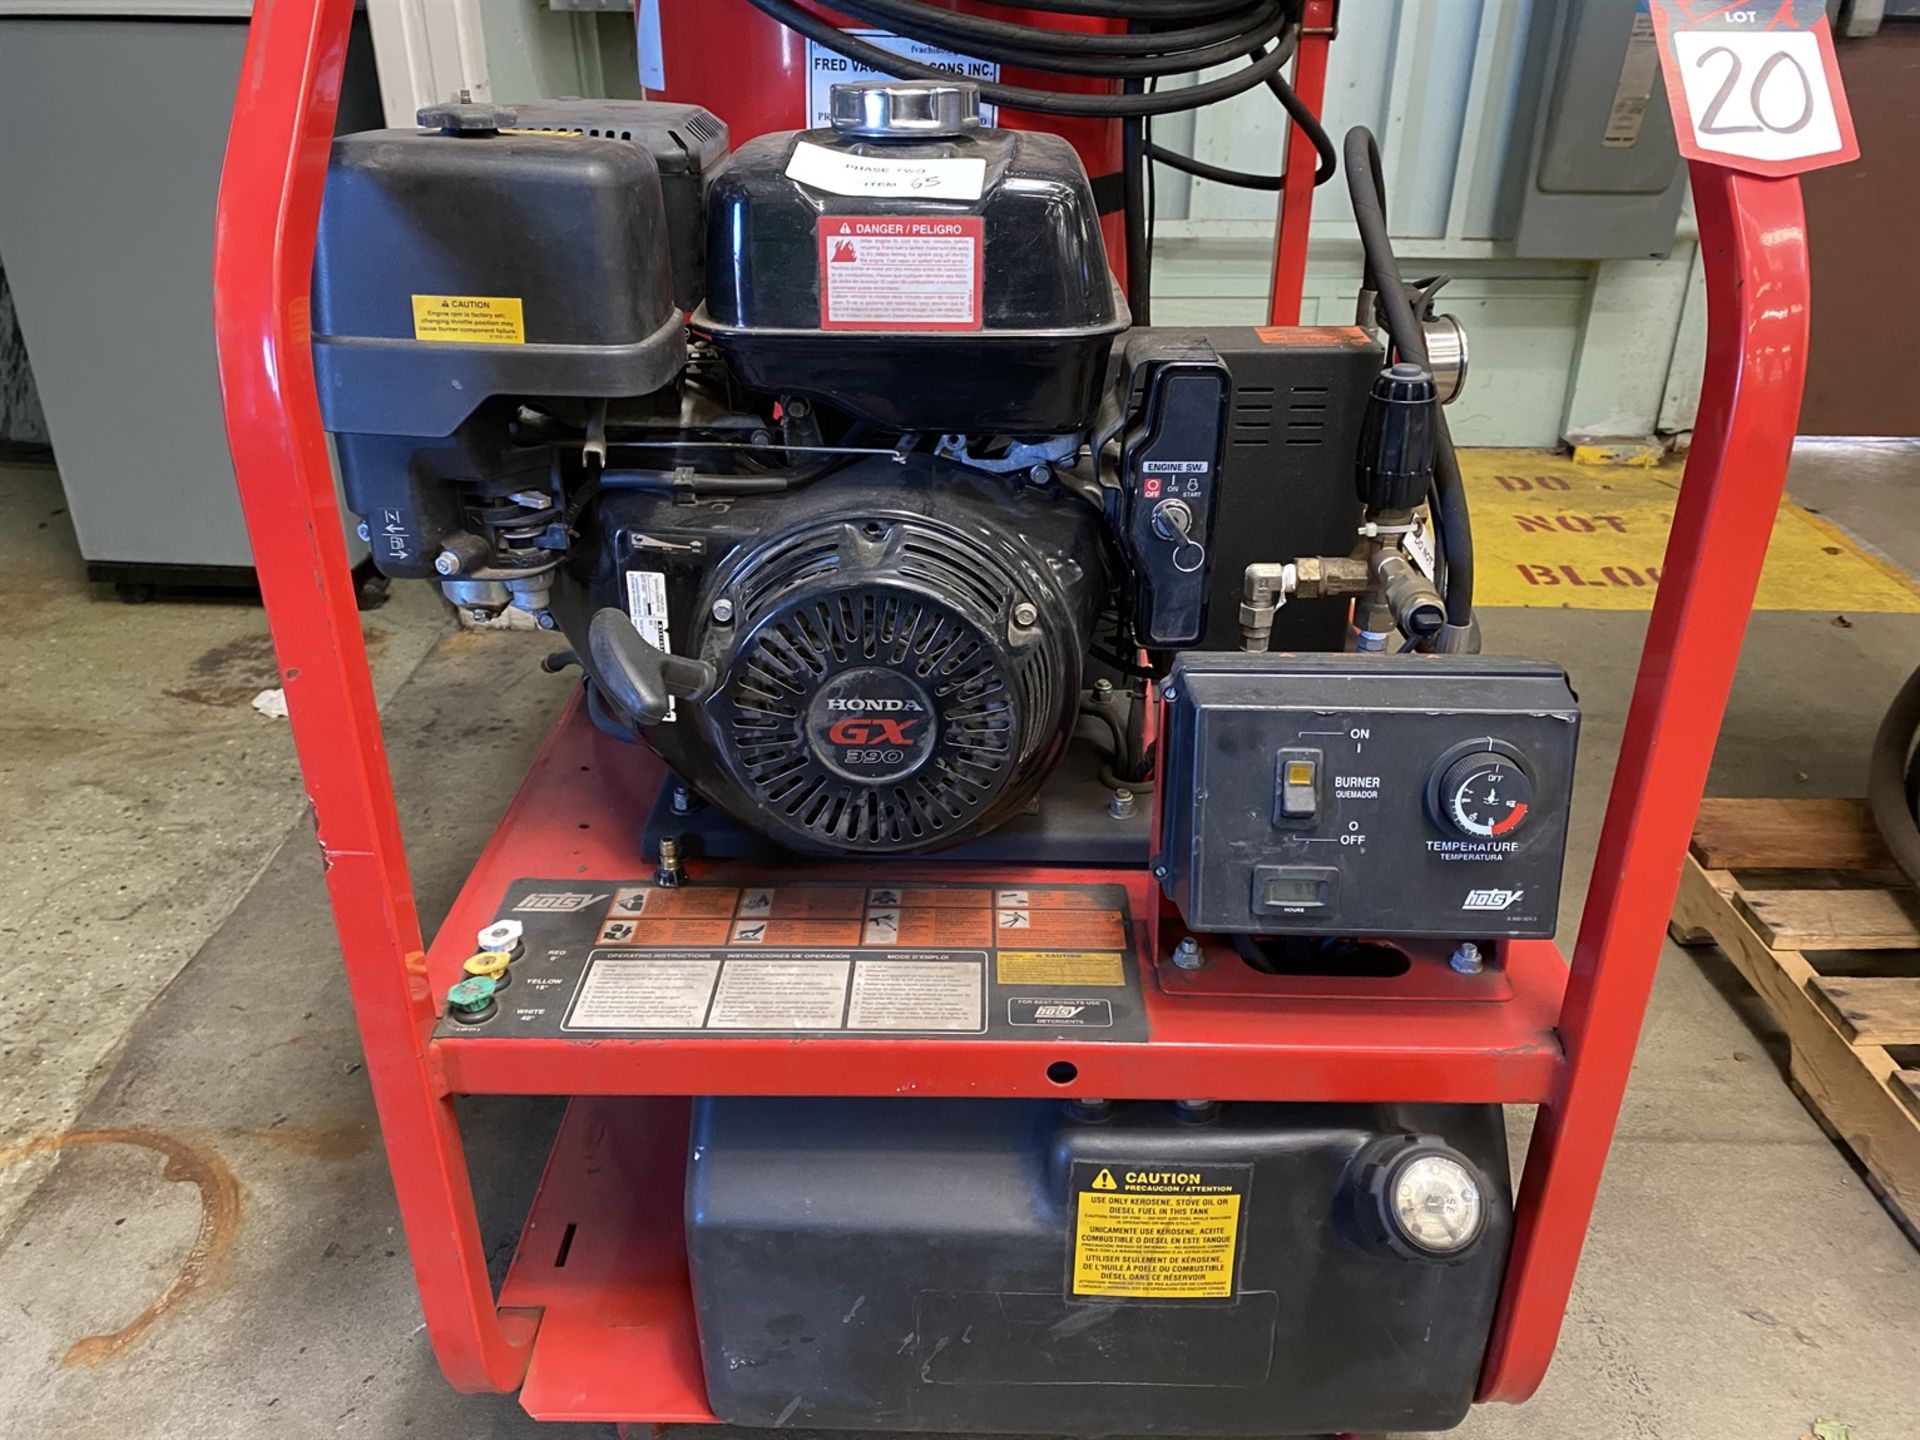 HOTSY 1075BE Pressure Washer, s/n 11105660-101258, 3500 PSI, 385,800 BTUin, 225 Degree F Max Temp, - Image 3 of 5